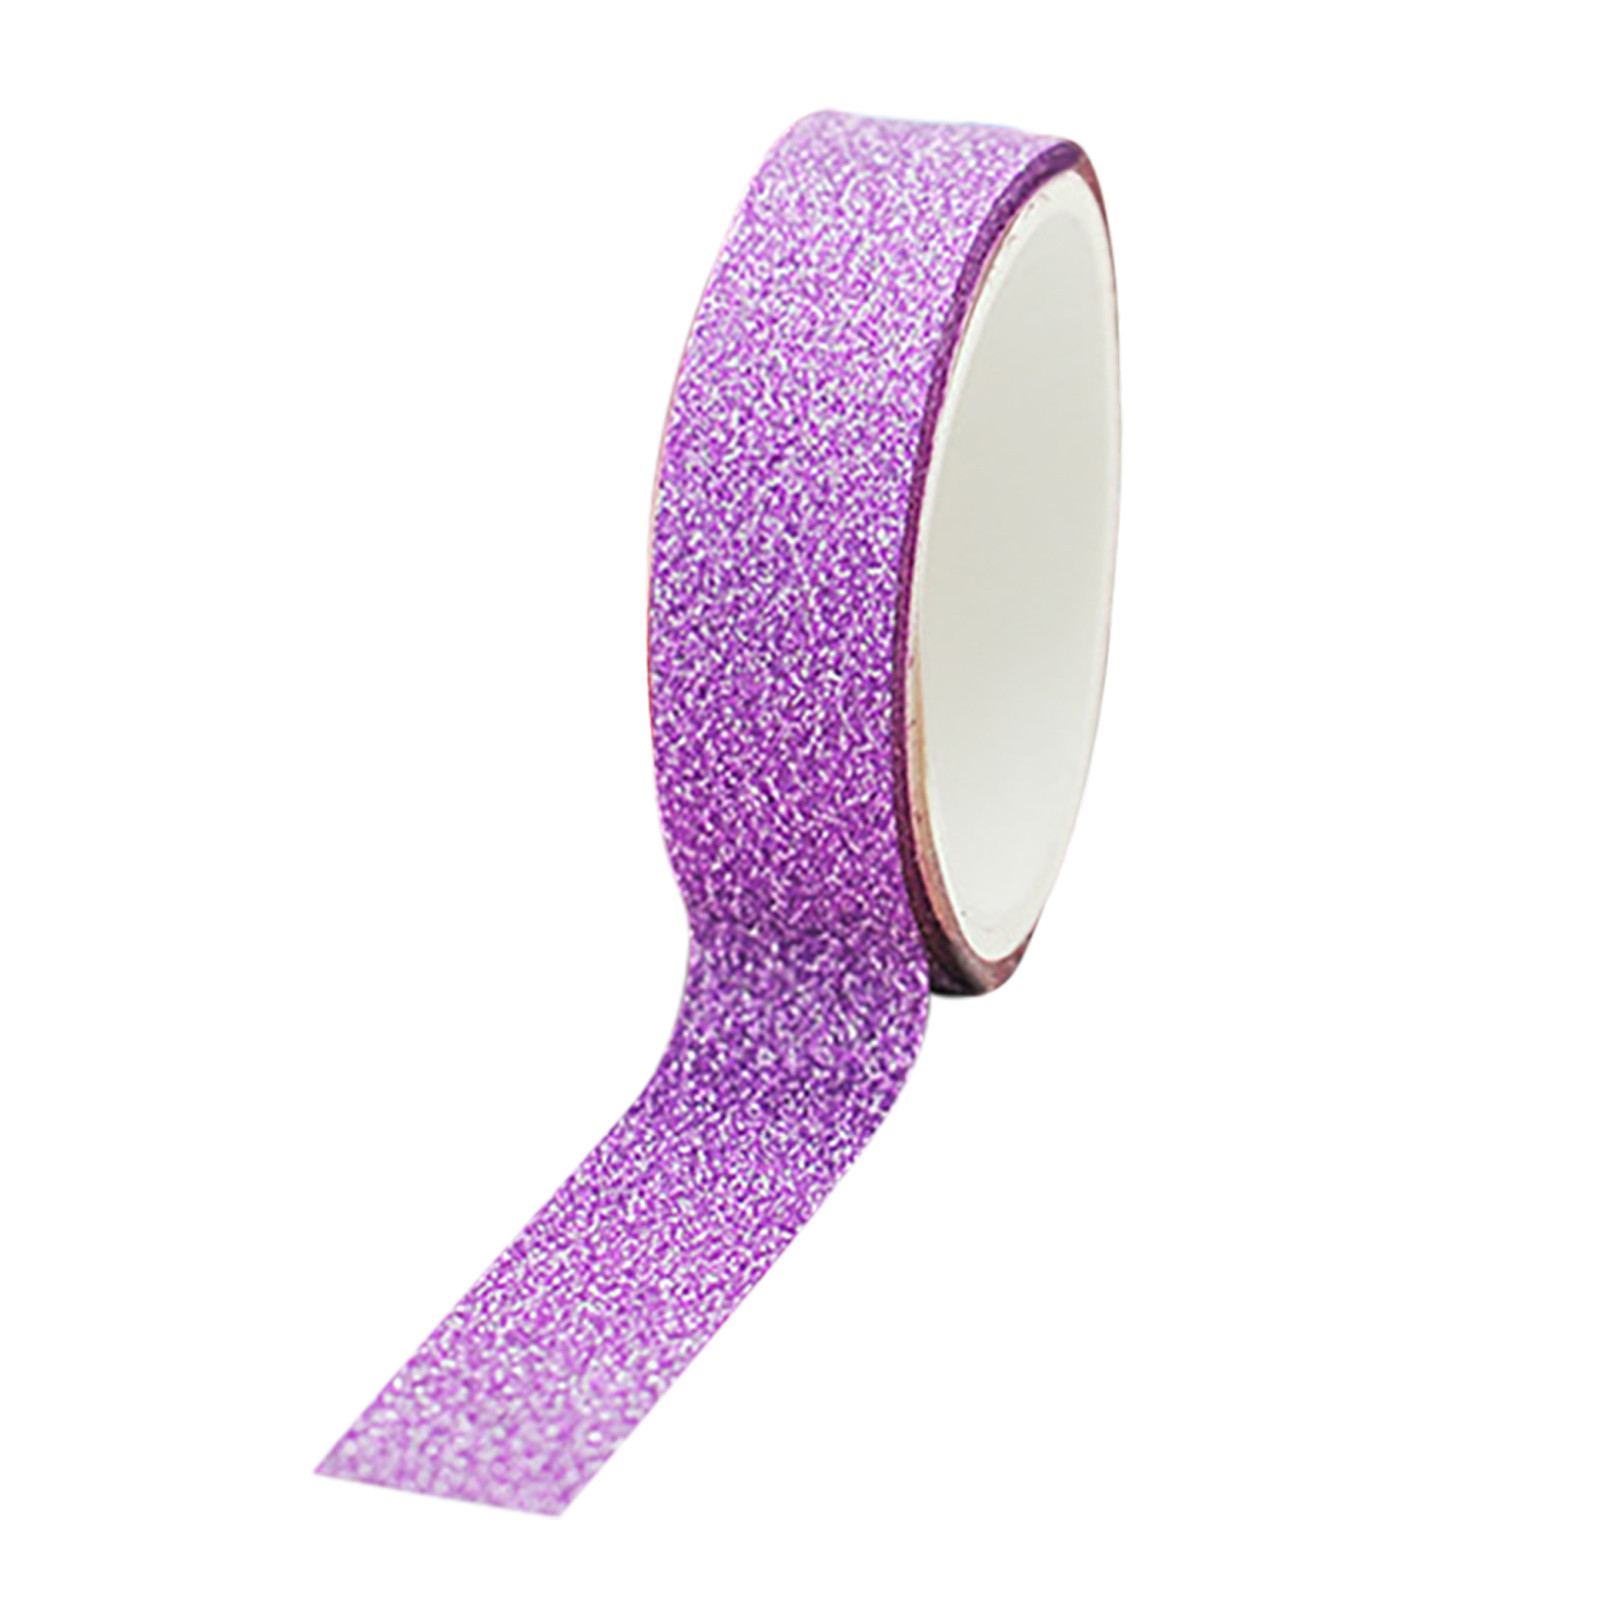 WANYNG Adhesive Tape 1 Roll Glitter Washi Tape DIY Decorative Colored Tape  Sticky Craft Tape Self Adhesive Glitter Tape For Scrapbooking And Paper